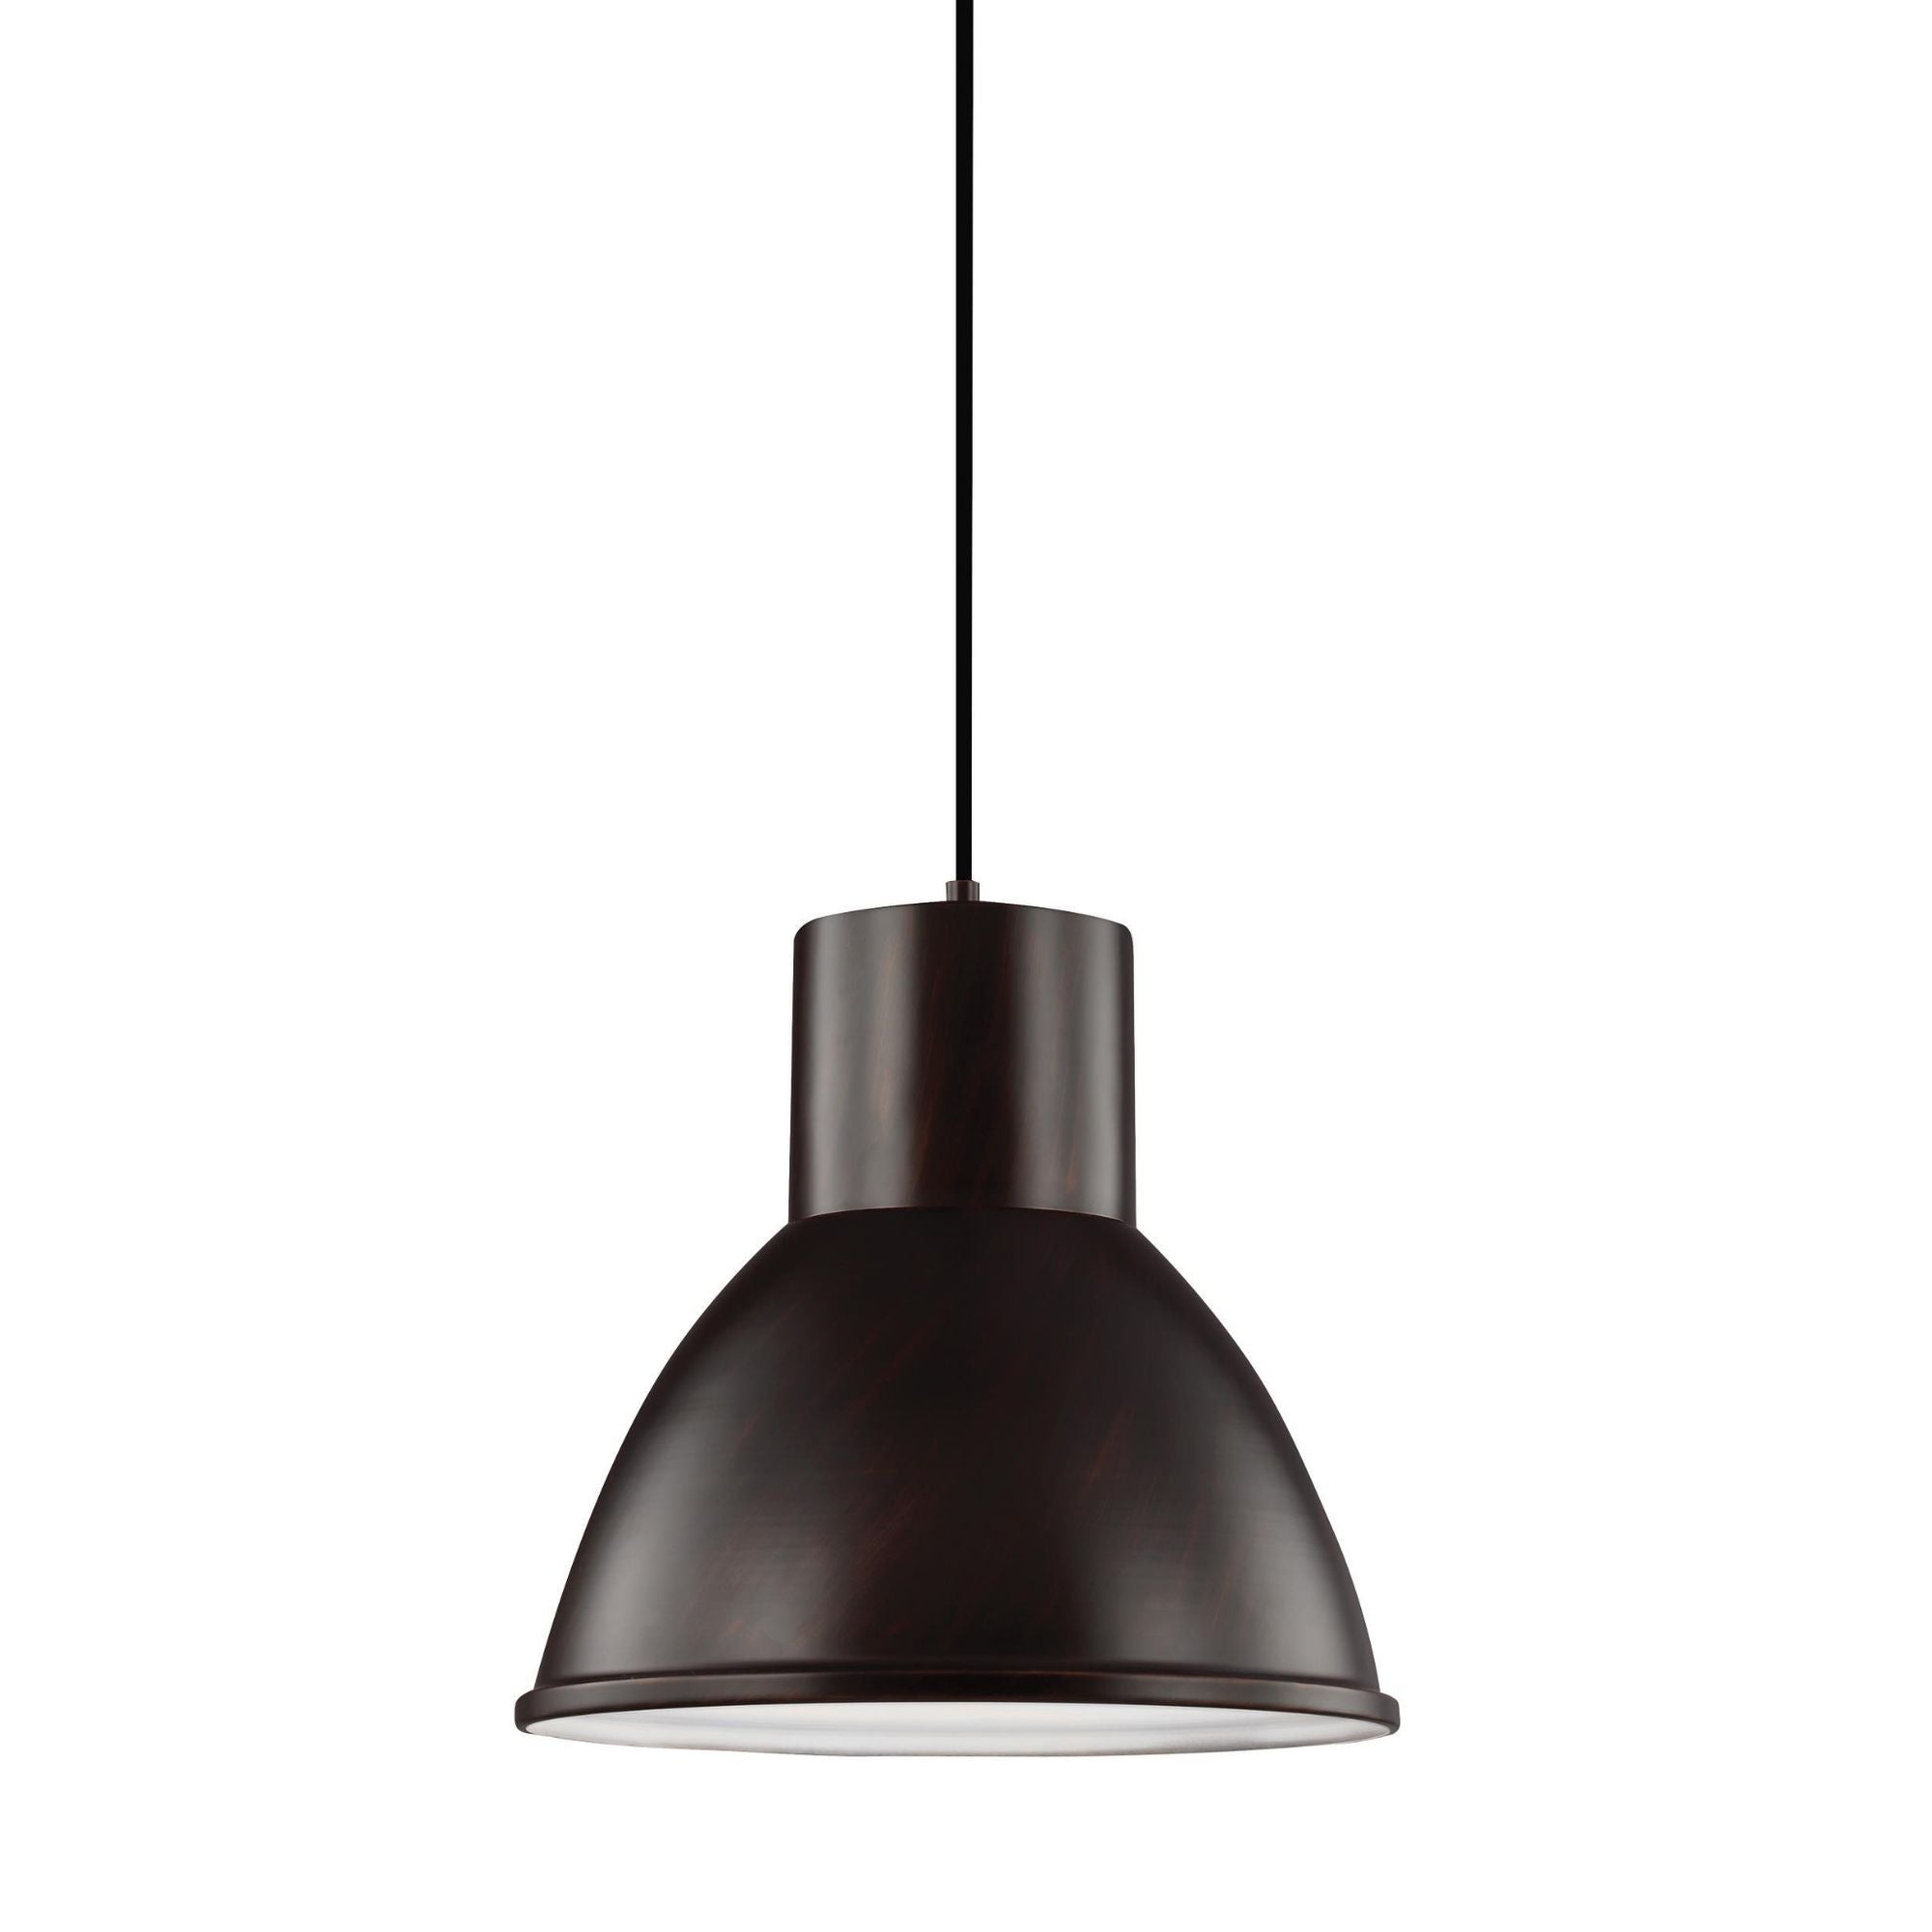 Division Street One Light Pendant LED Contemporary 14" Height Steel in Bronze